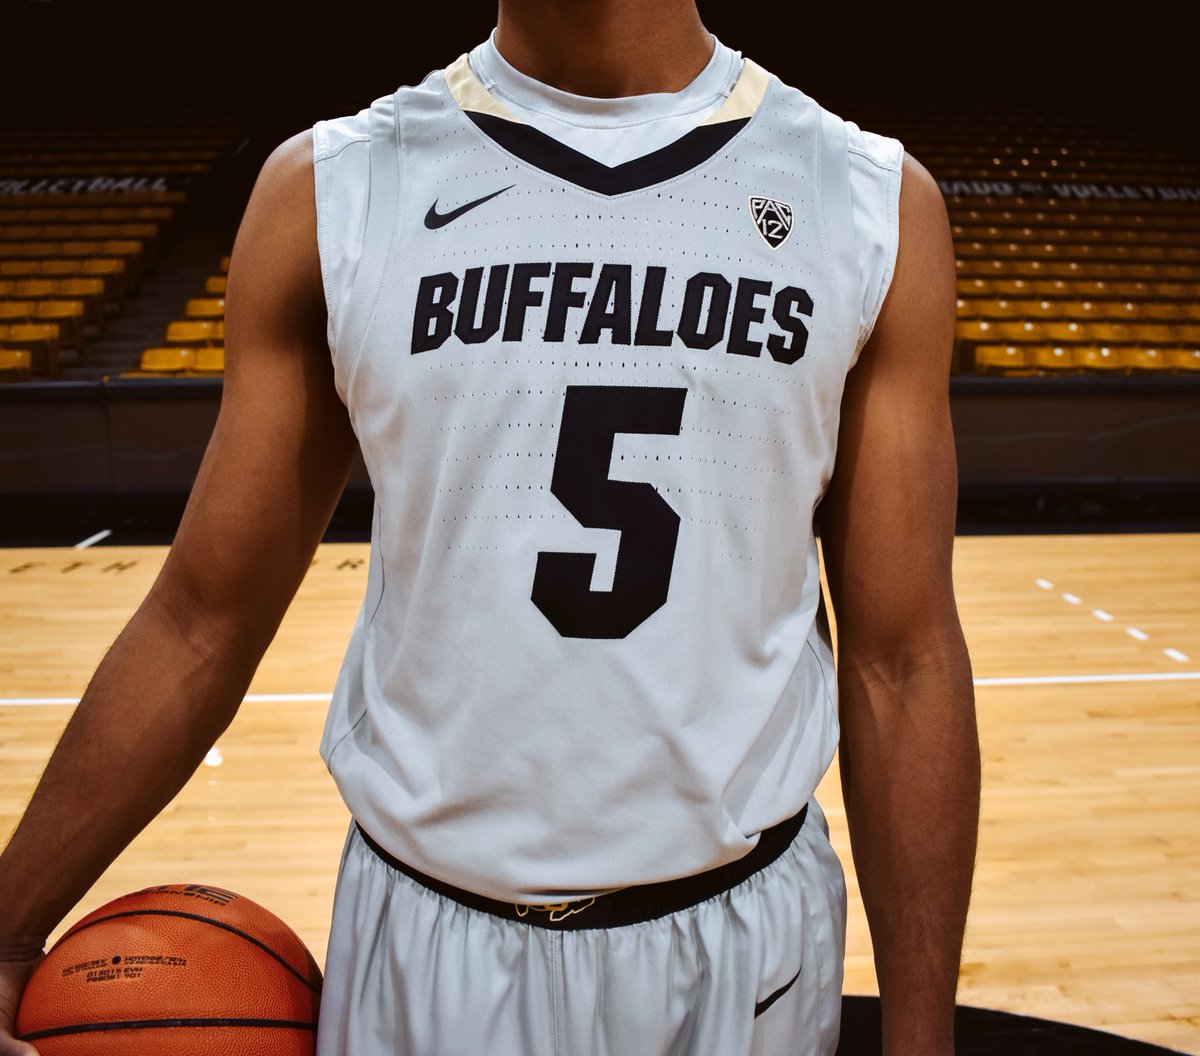 Here’s the first look at our new threads! 🔥💯 #GoBuffs